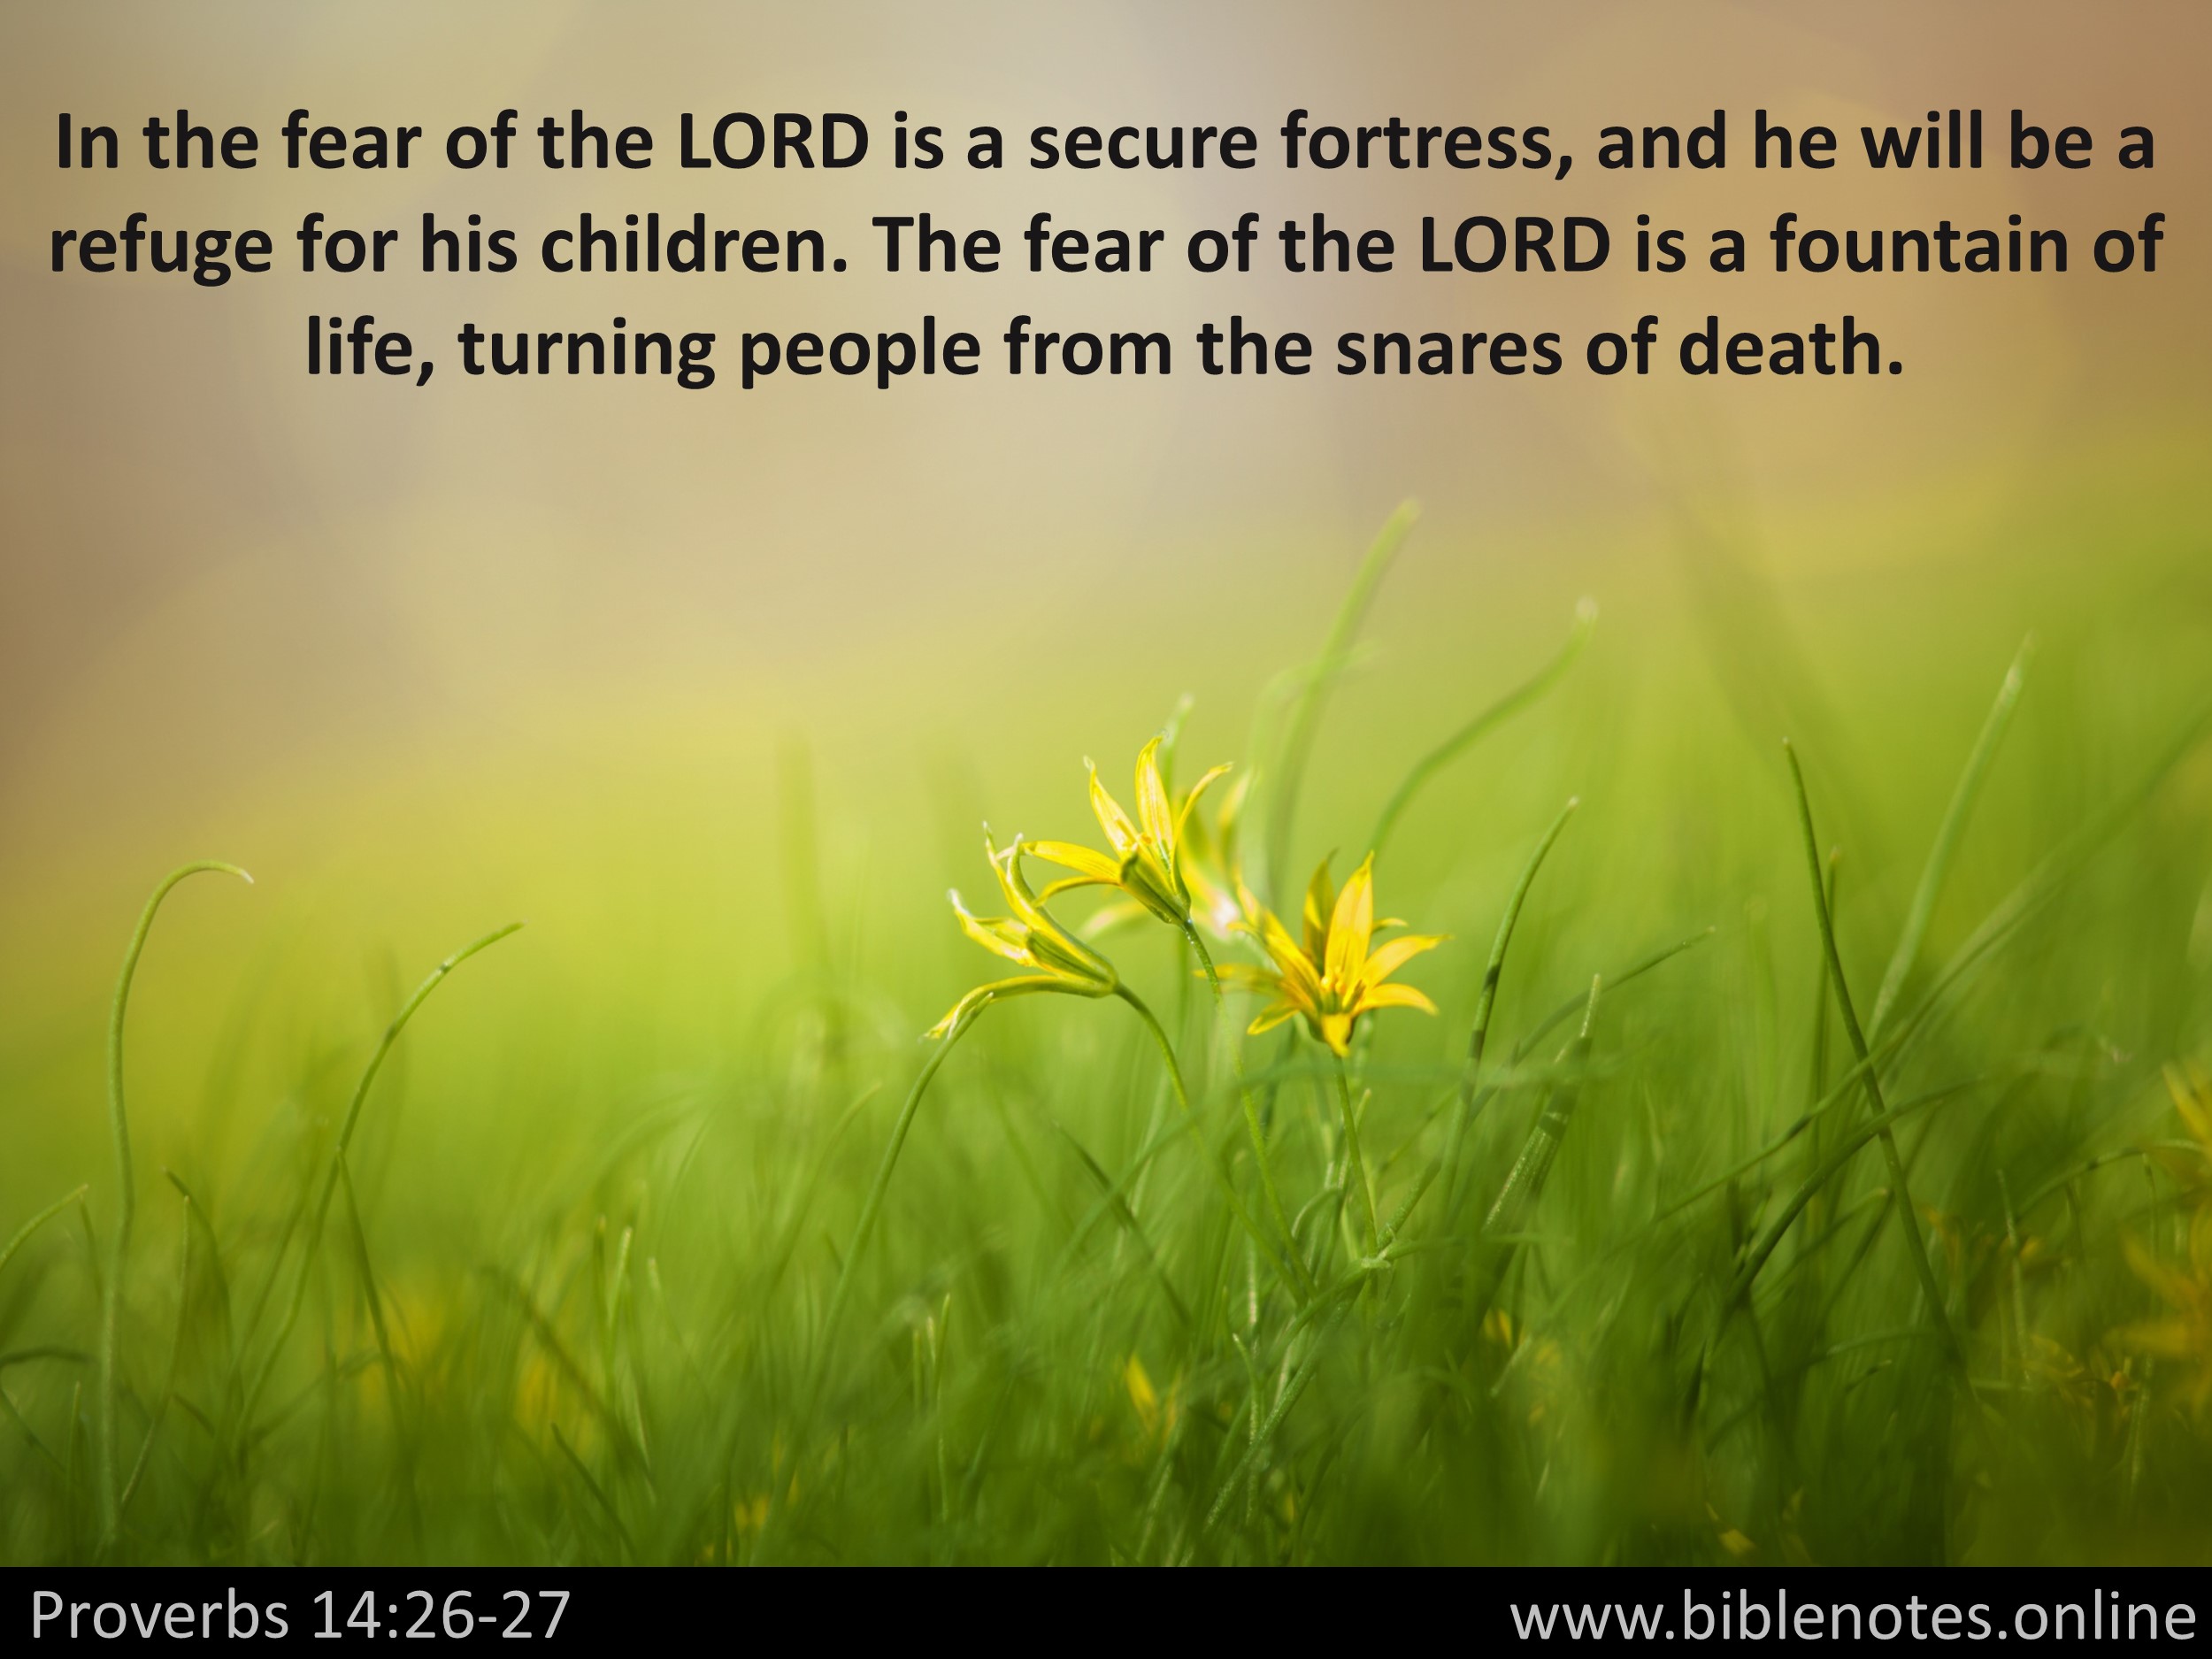 Bible Verse from Proverbs Chapter 14